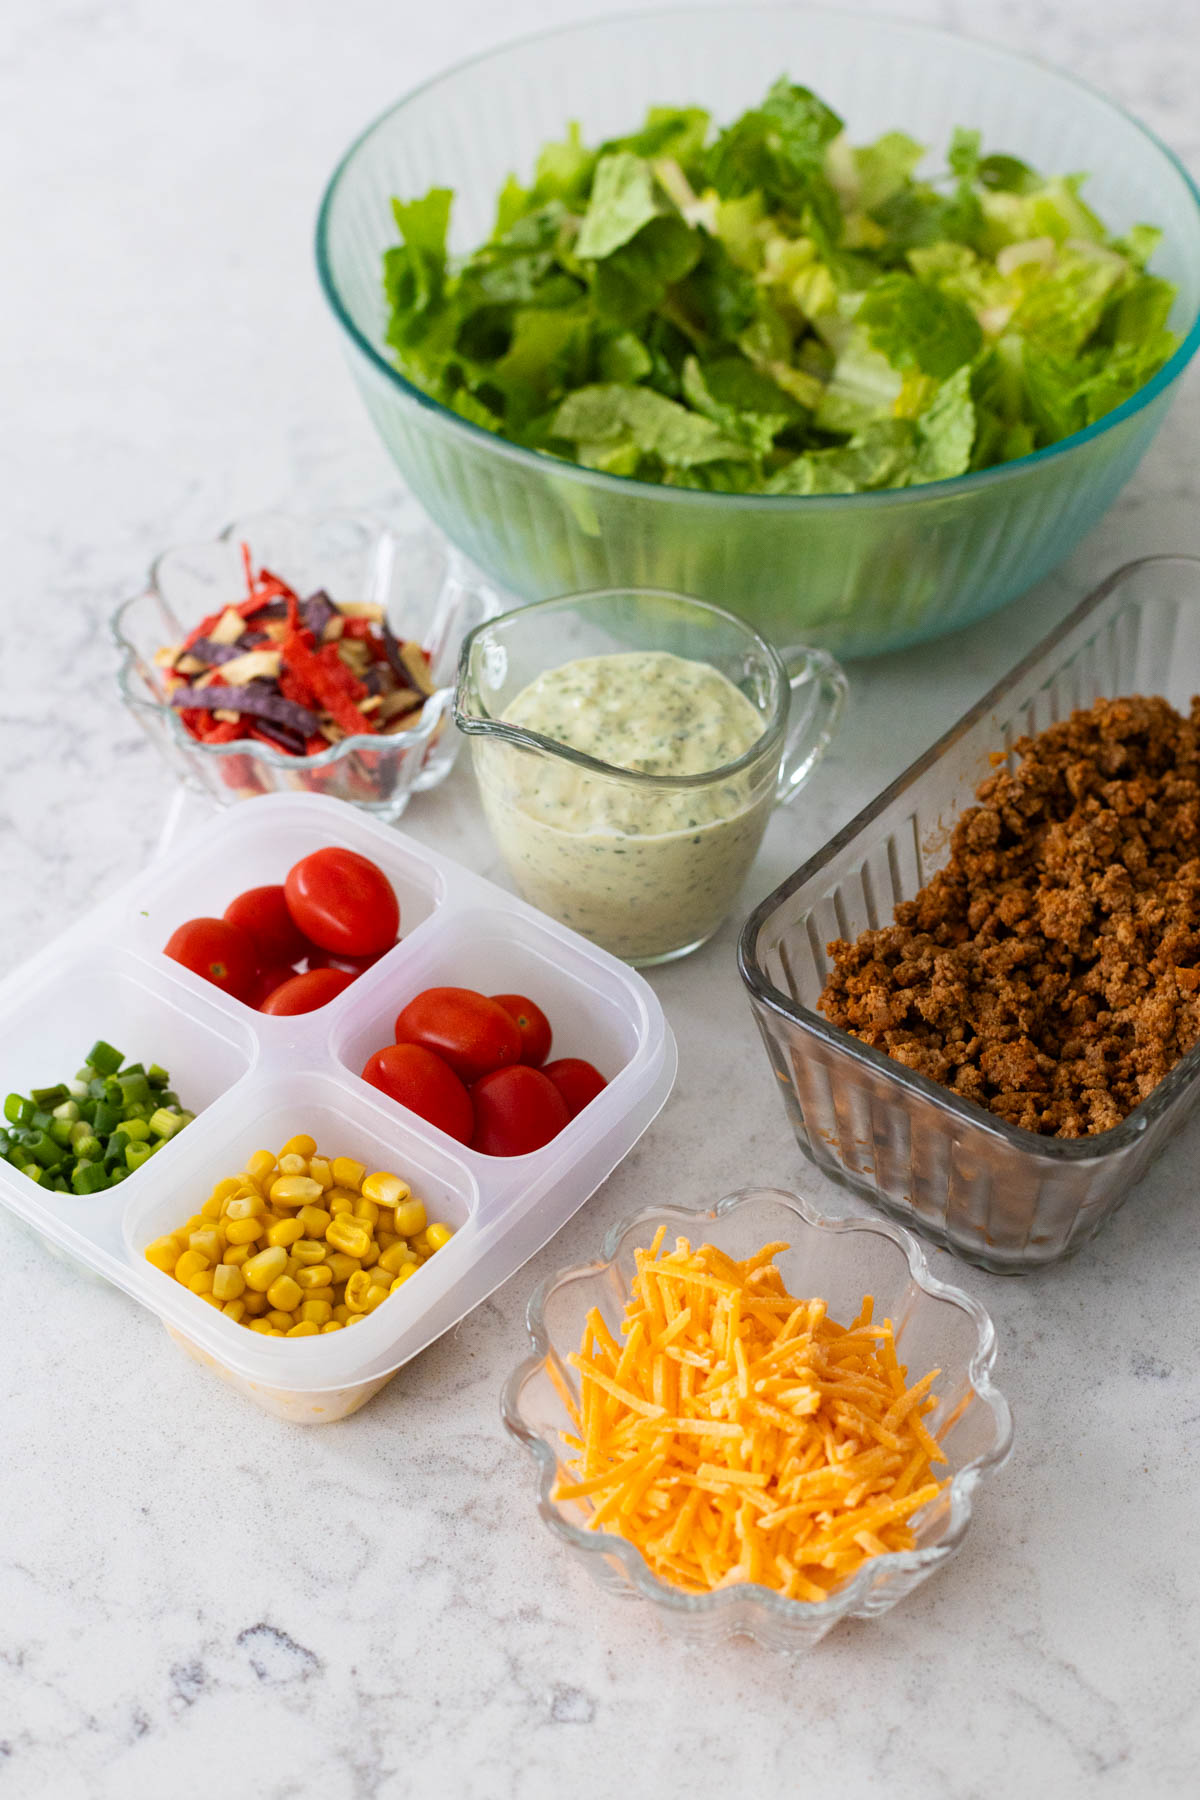 The ingredients to assemble a taco salad are on the counter.